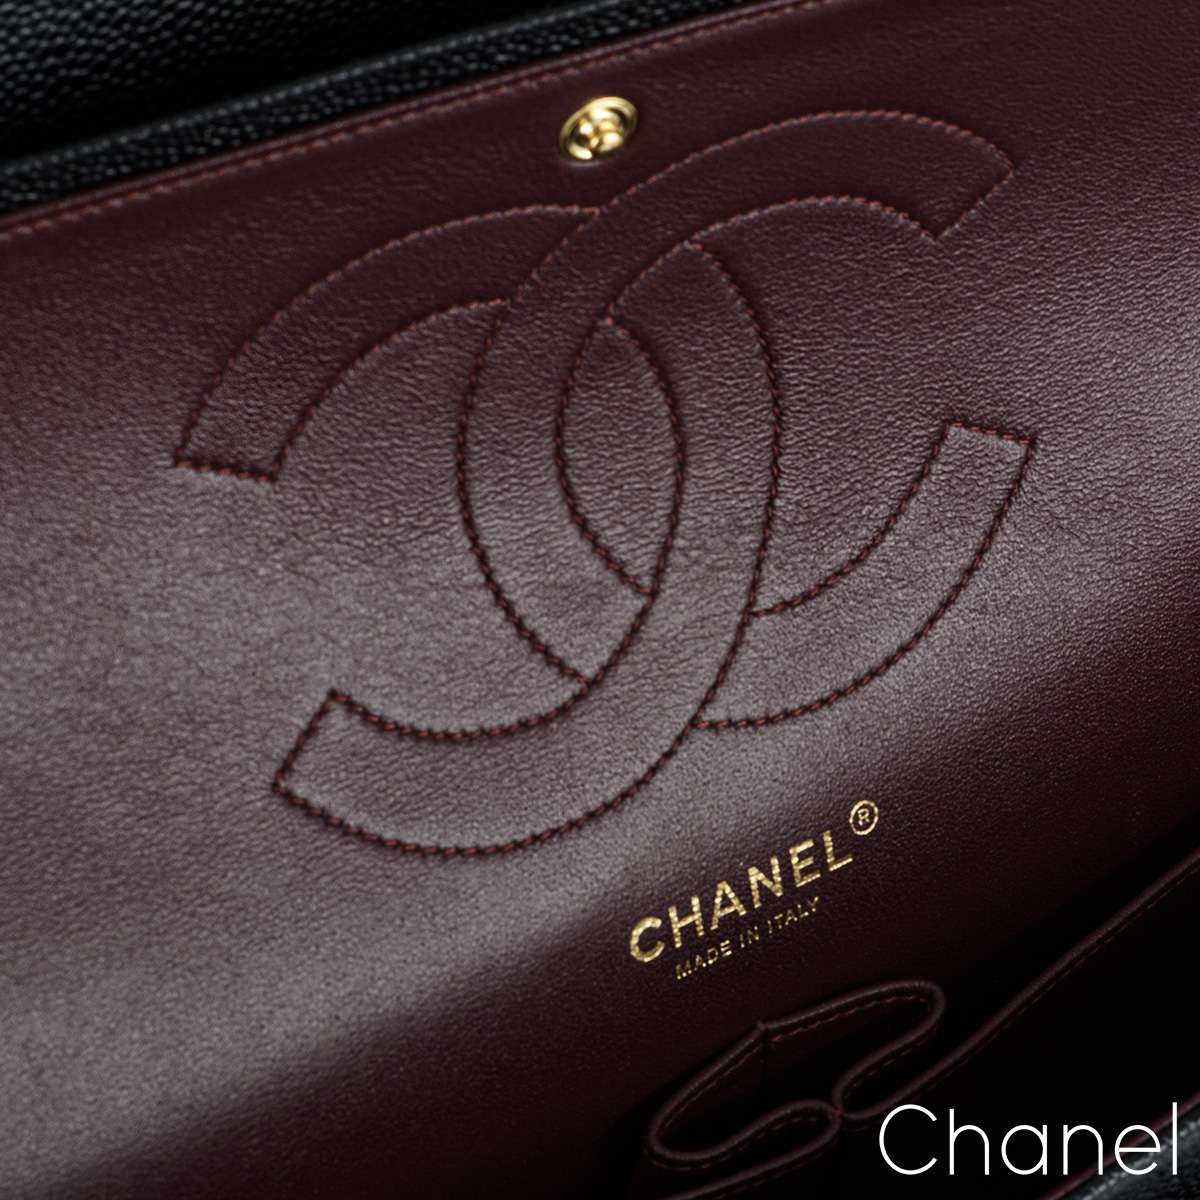 Chanel Black Quilted Caviar New Classic Double Flap Jumbo Q6BAQP0FK4070